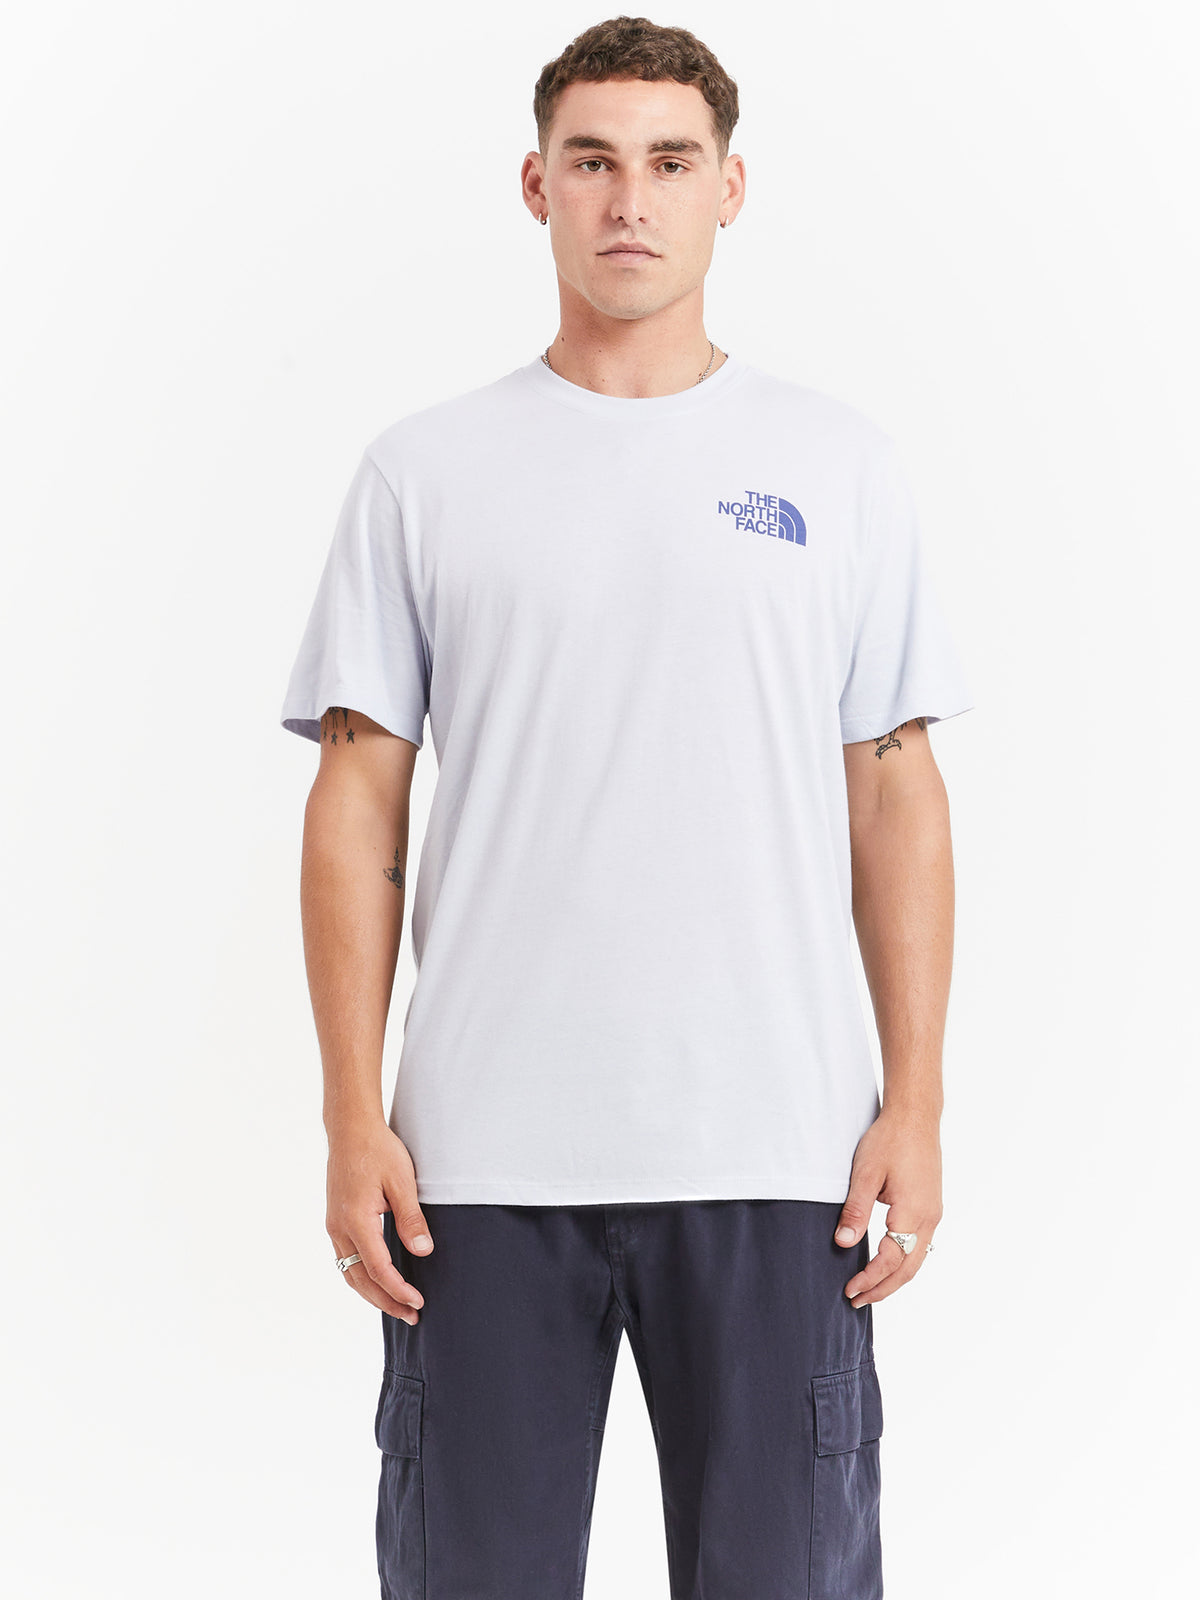 Places We Love T-Shirt in Dusty Periwinkle Blue